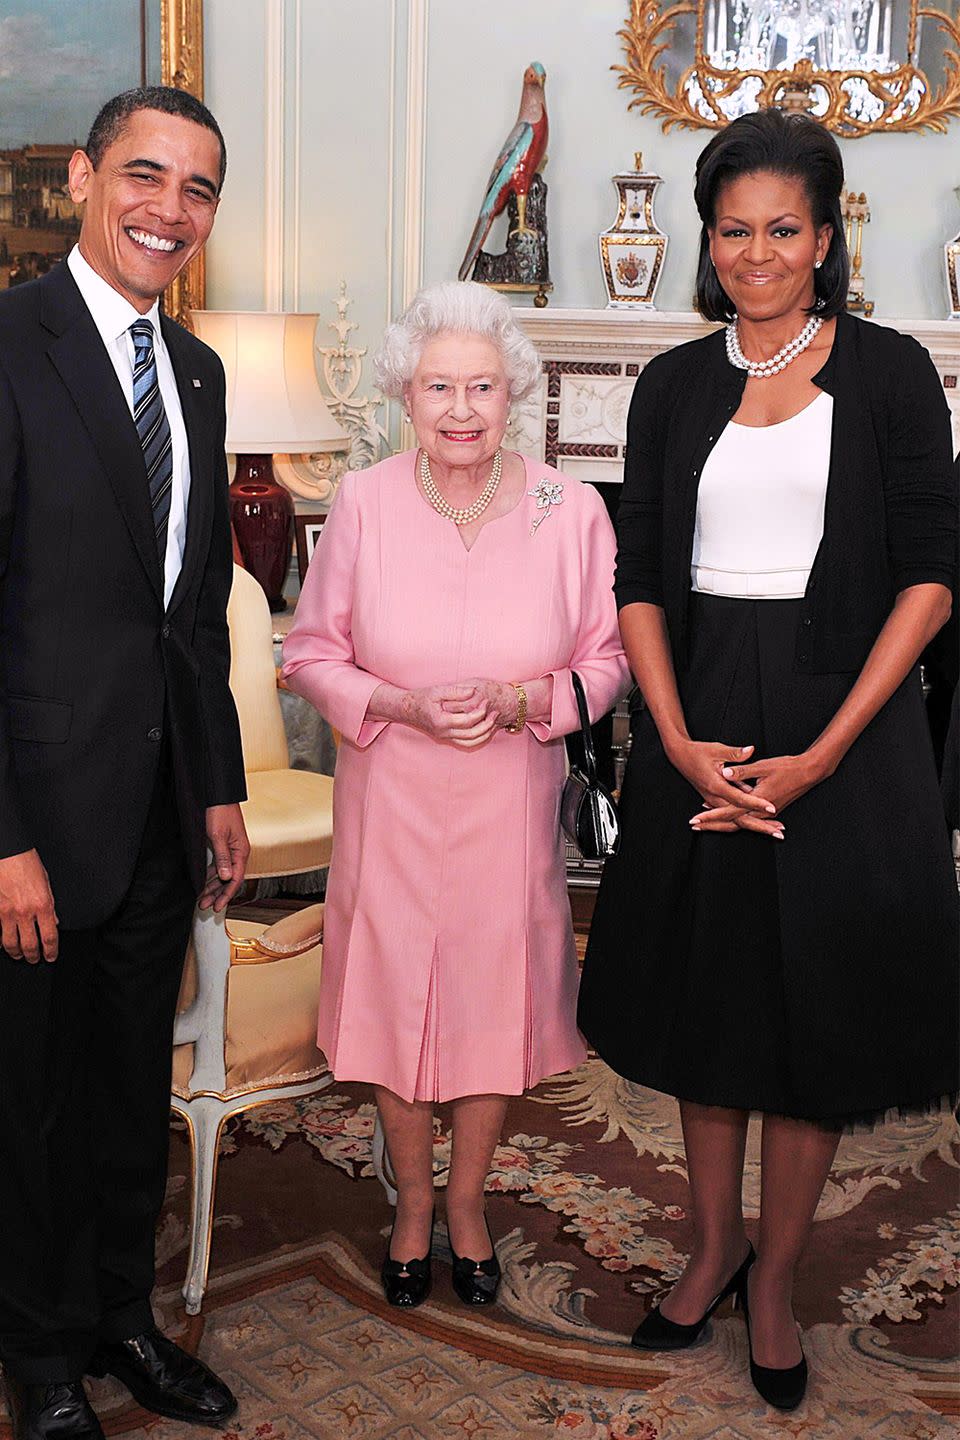 The Queen hugged Michelle Obama